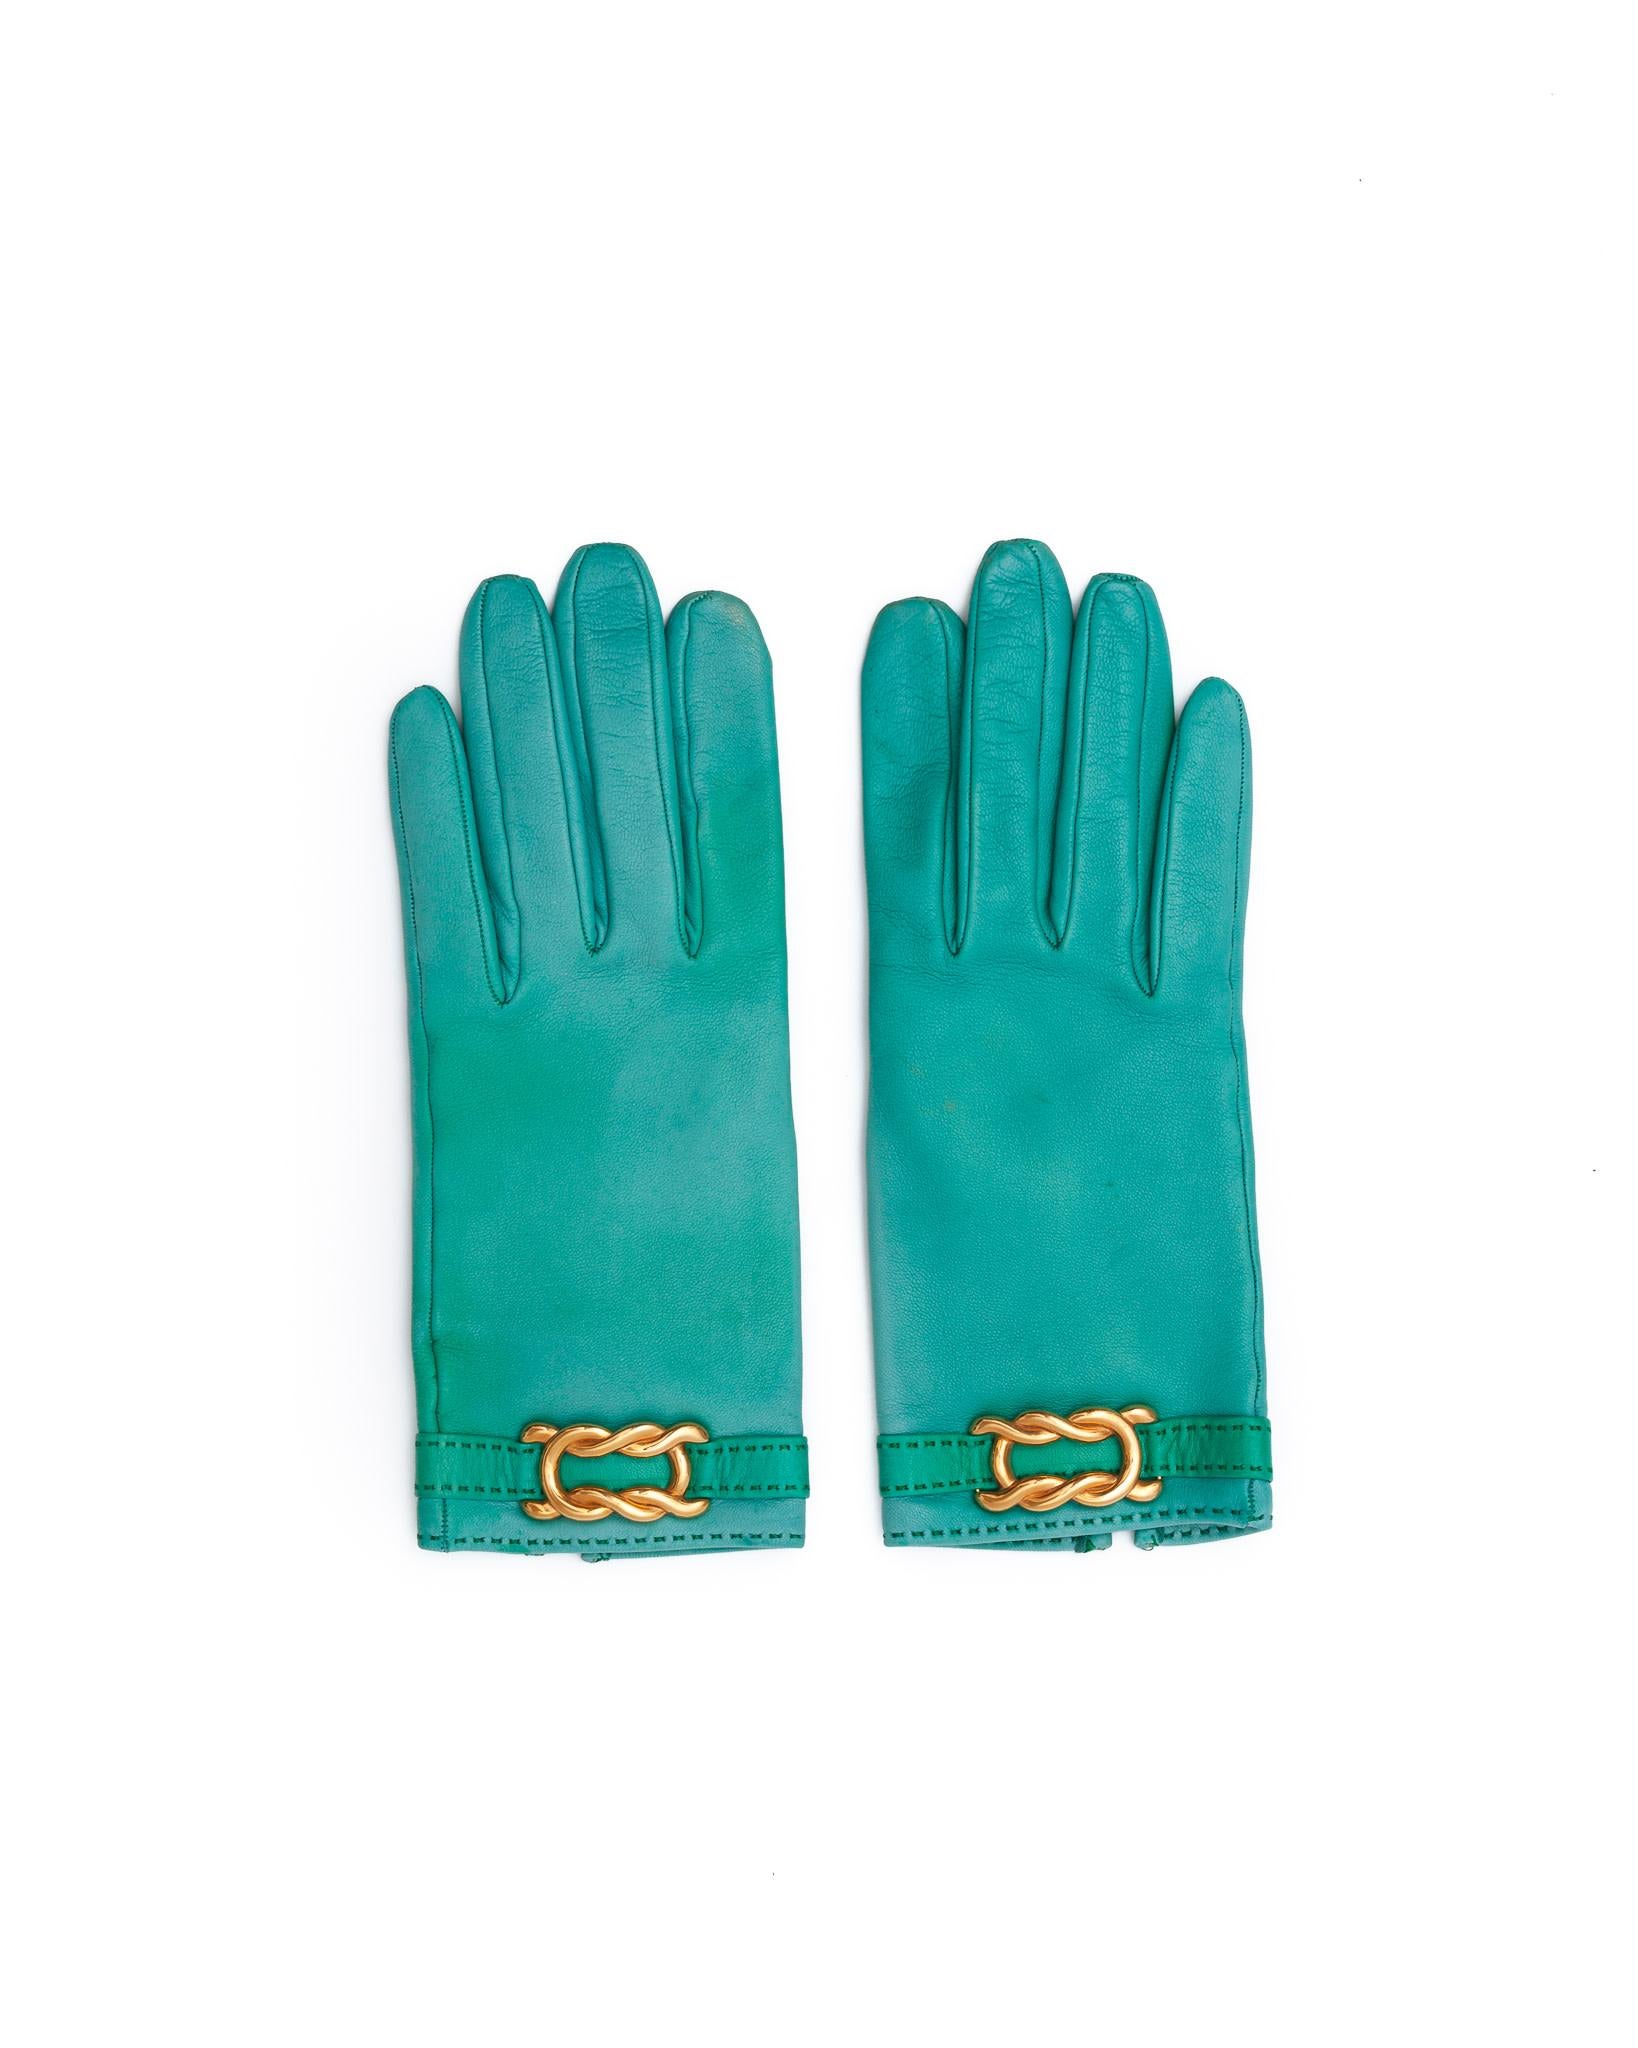 Pair of turquoise gloves from Hermes, orange box included.

SIZE: Small
COLOR: Turquoise
MATERIAL: Leather
CONDITION: Good condition - some evidence of leather wear and discolouring.